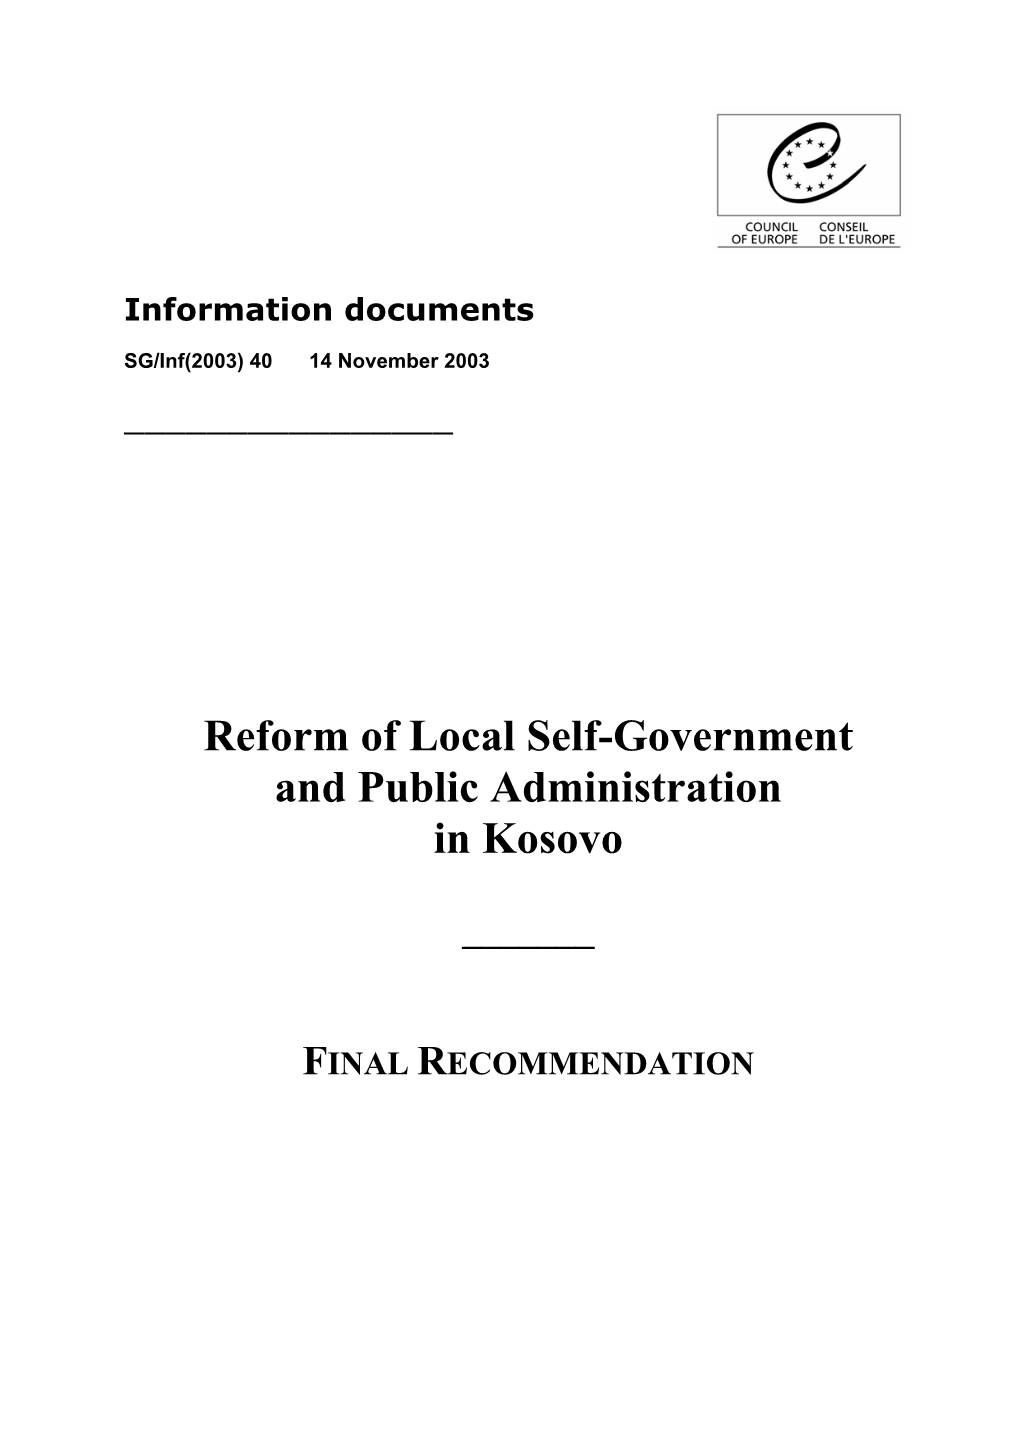 Reform of Local Self-Government and Public Administration in Kosovo